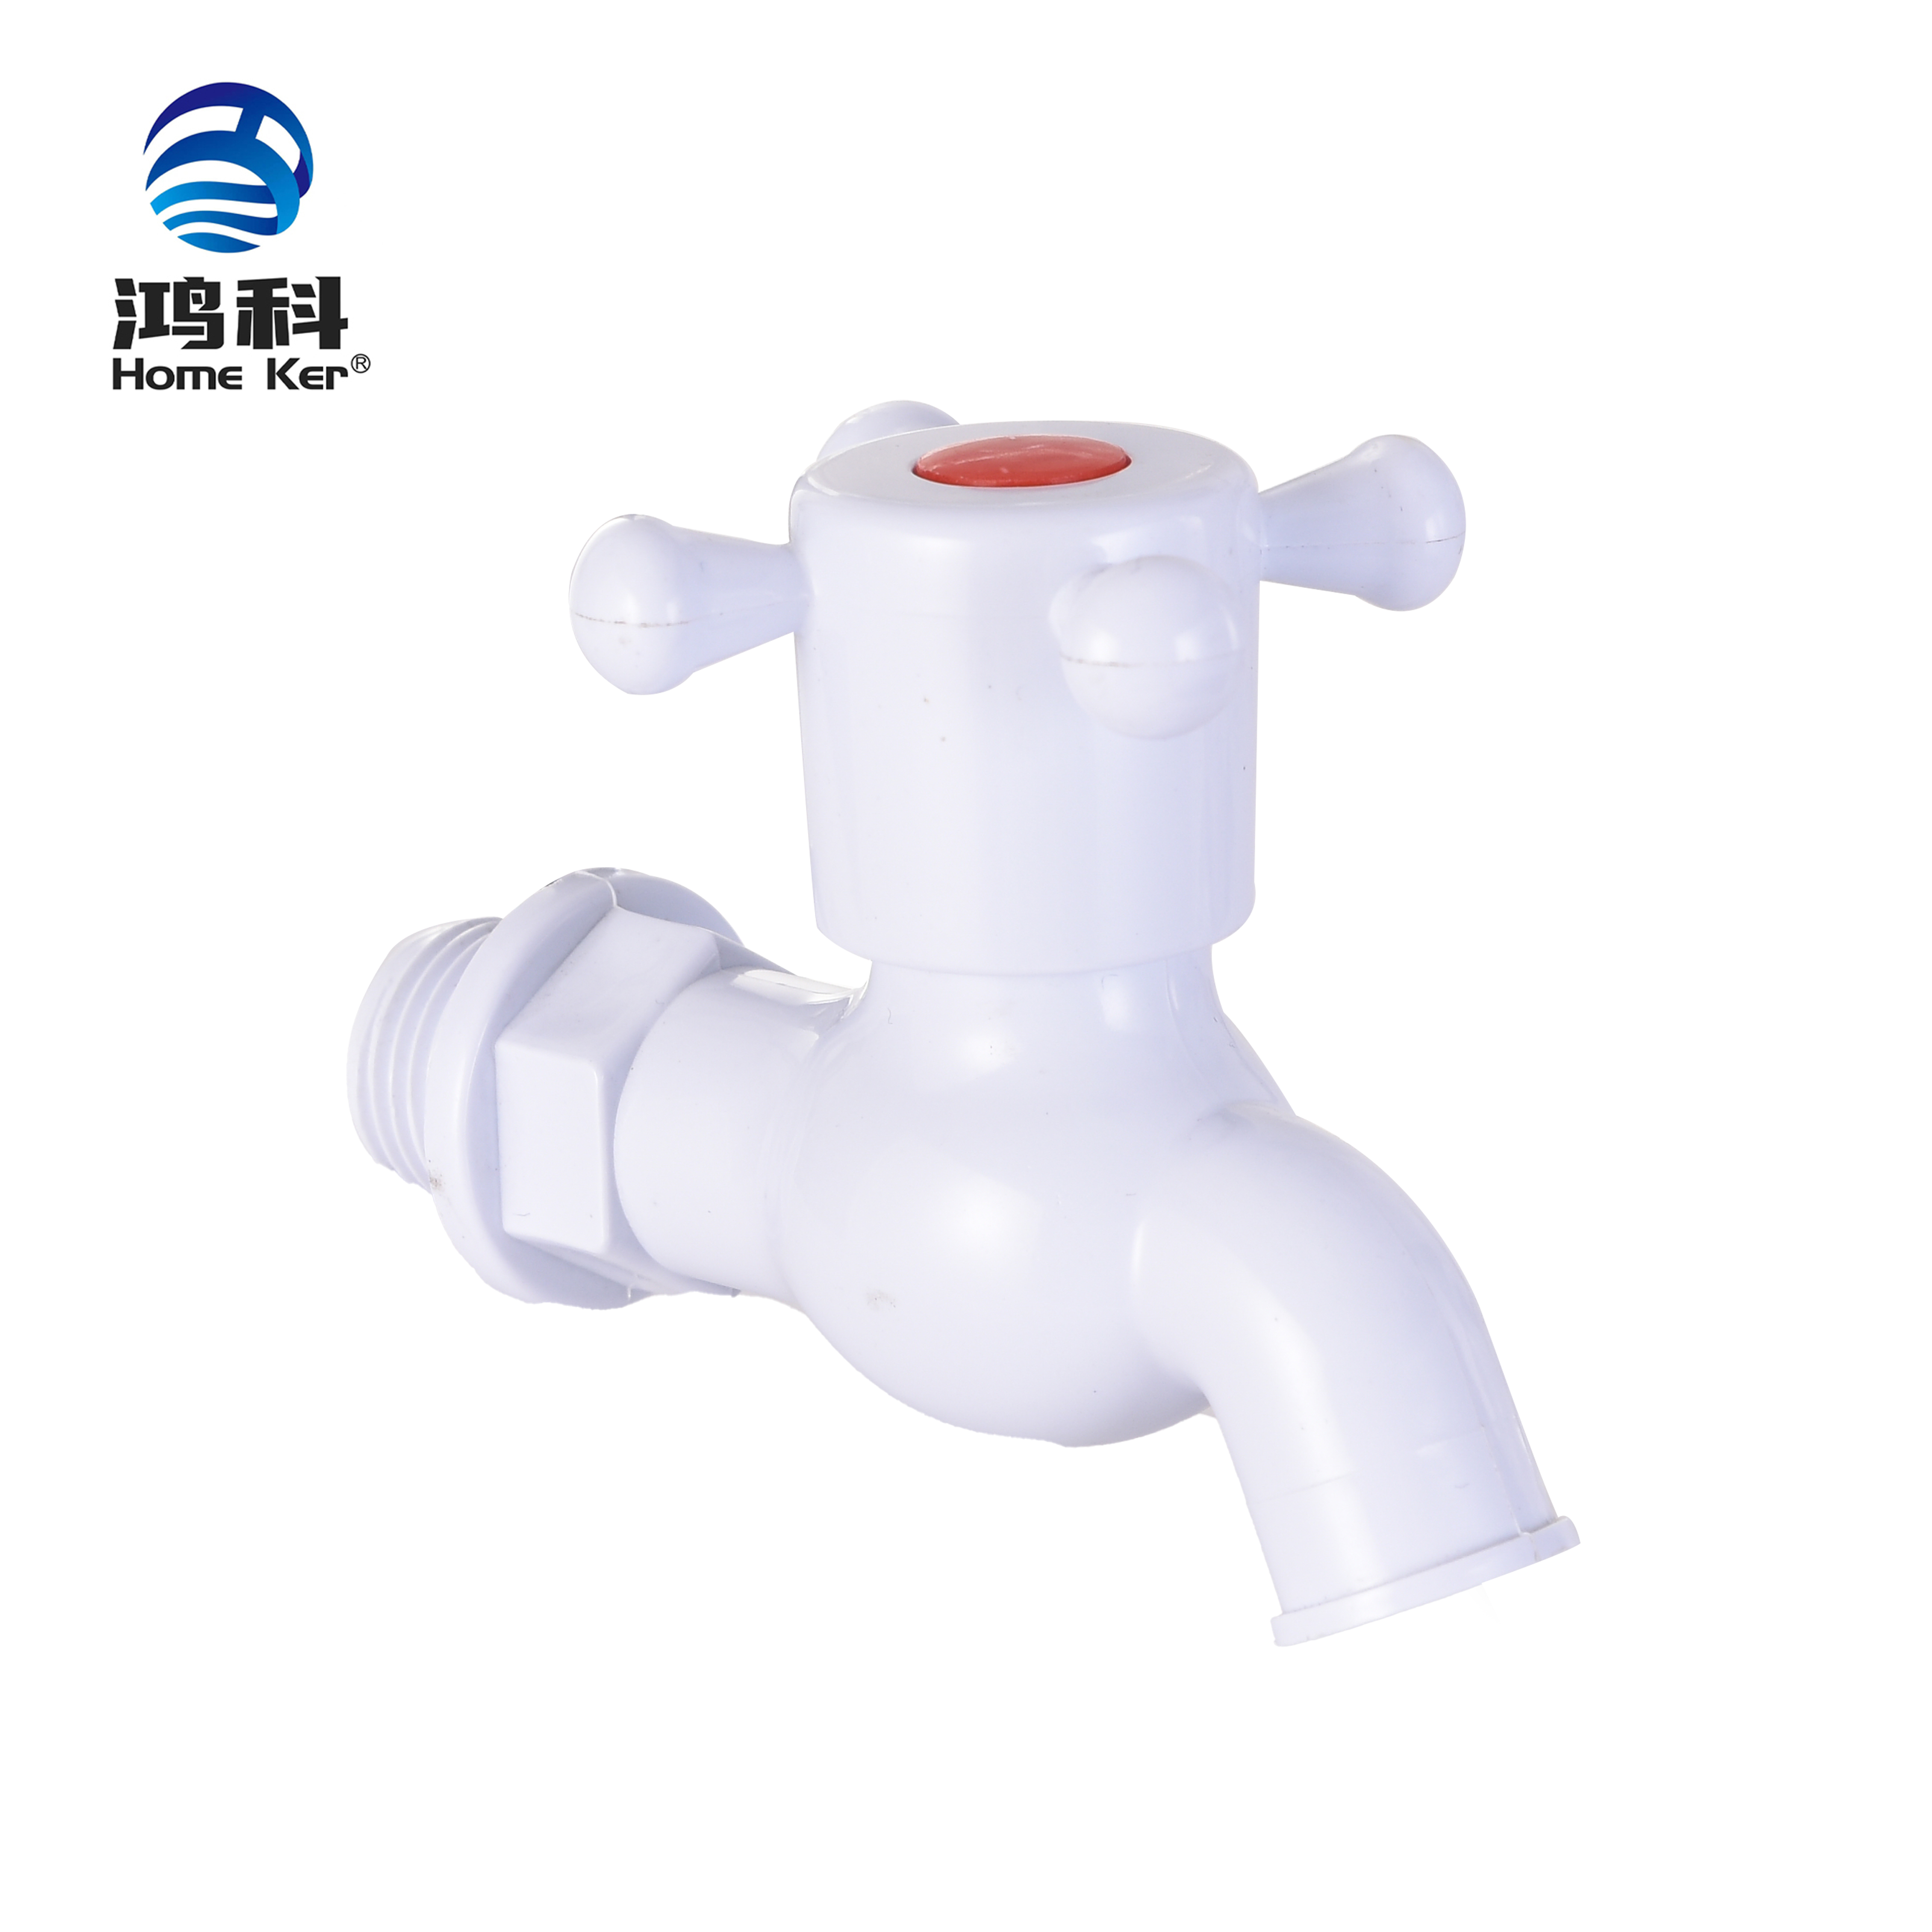 New Delivery for Foot Valve Water Pump Swing Check Valve - Plastic Water Tap For Bathroom – Hongke